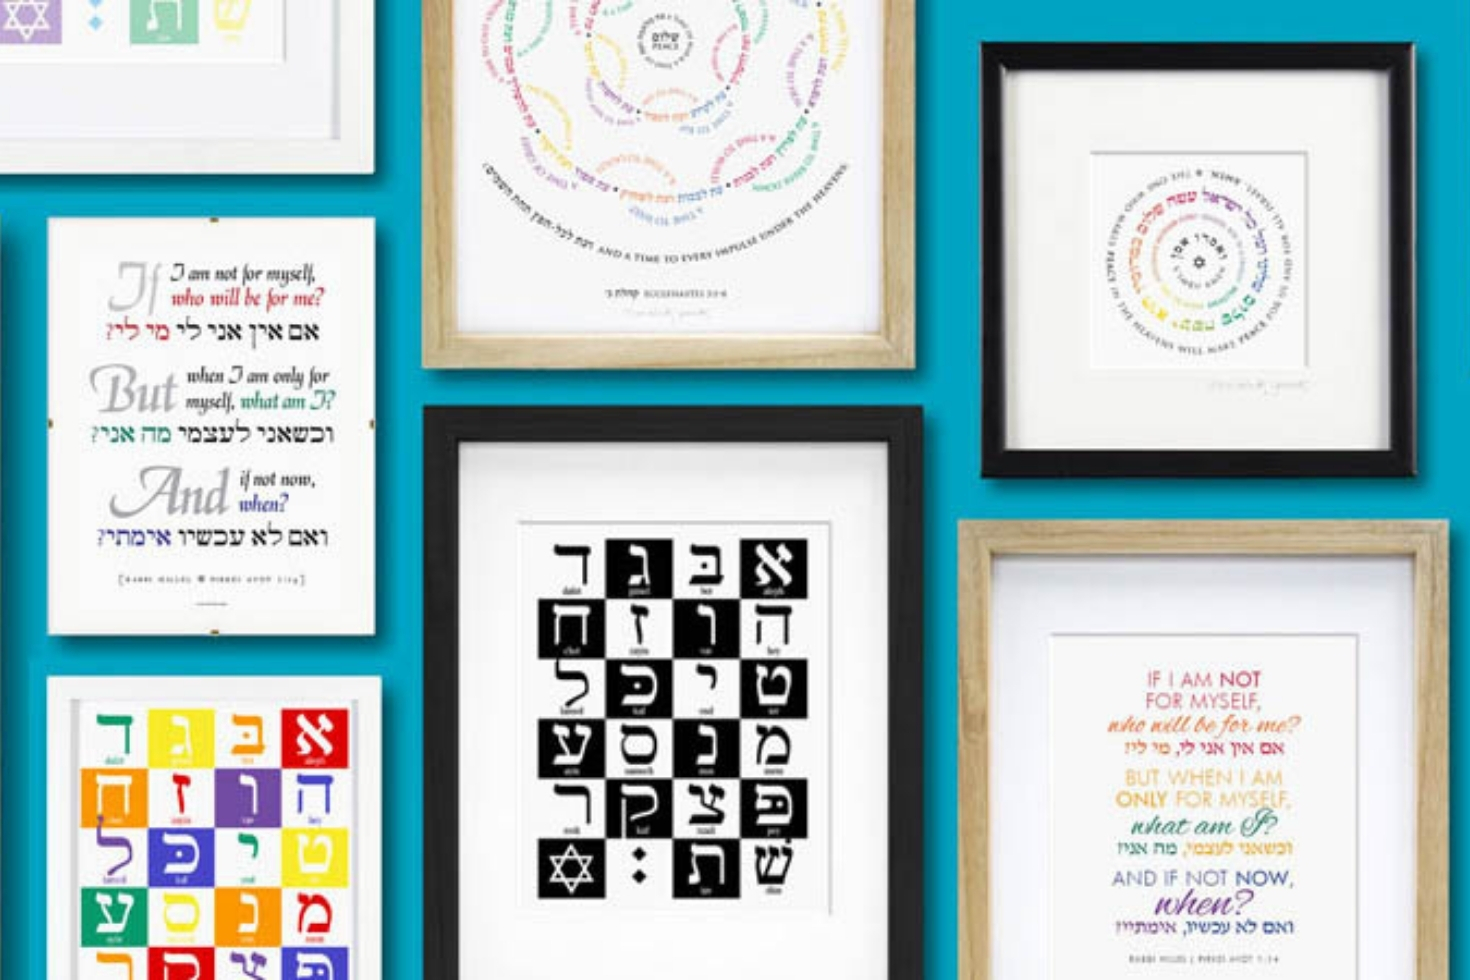 Multiple Judaic graphic designs in the form of art prints